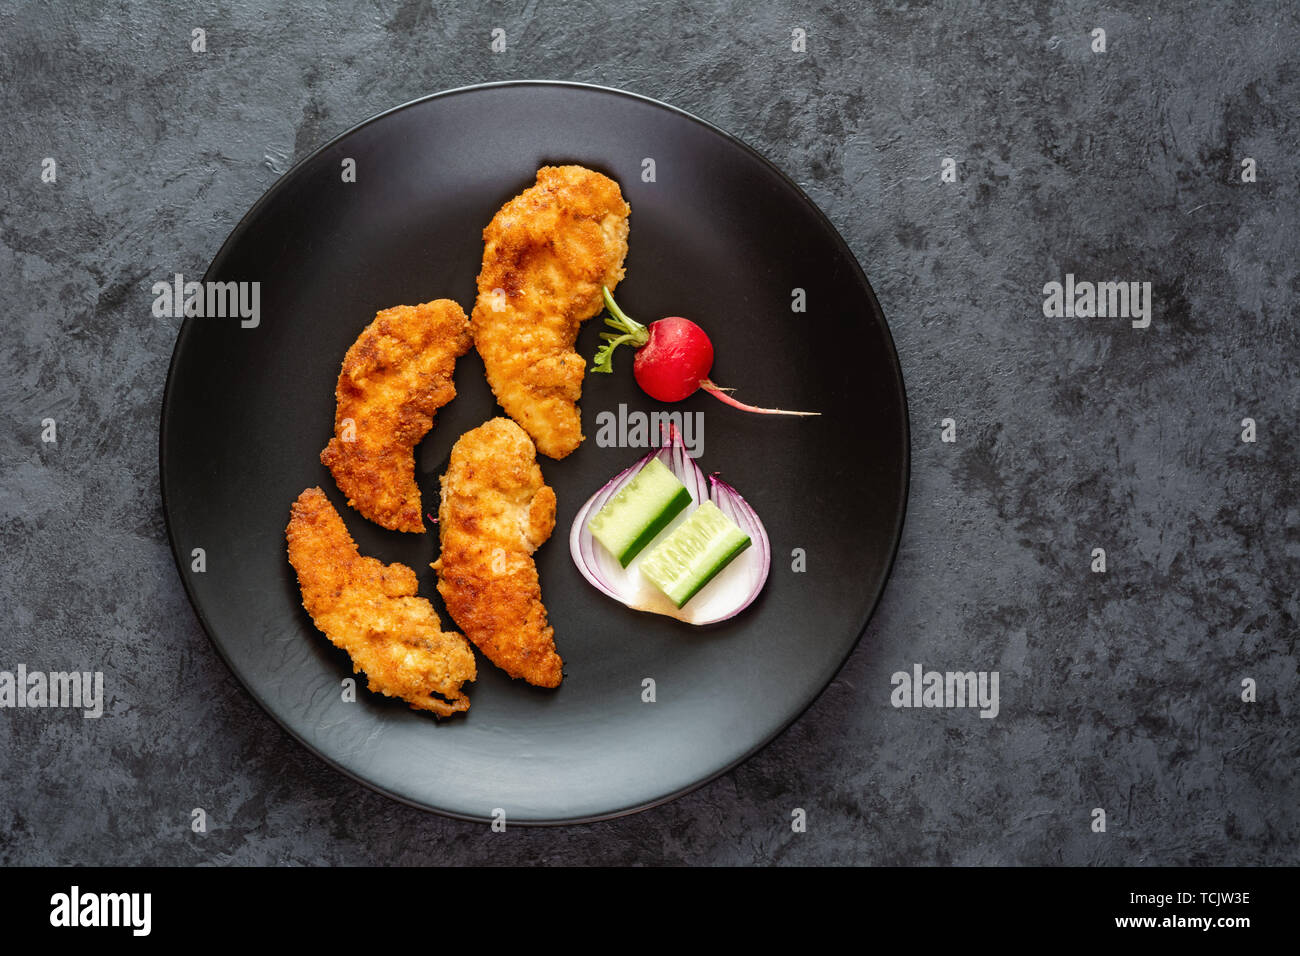 Fried chicken sirloin in breadcrumbs on a black dish. Stock Photo